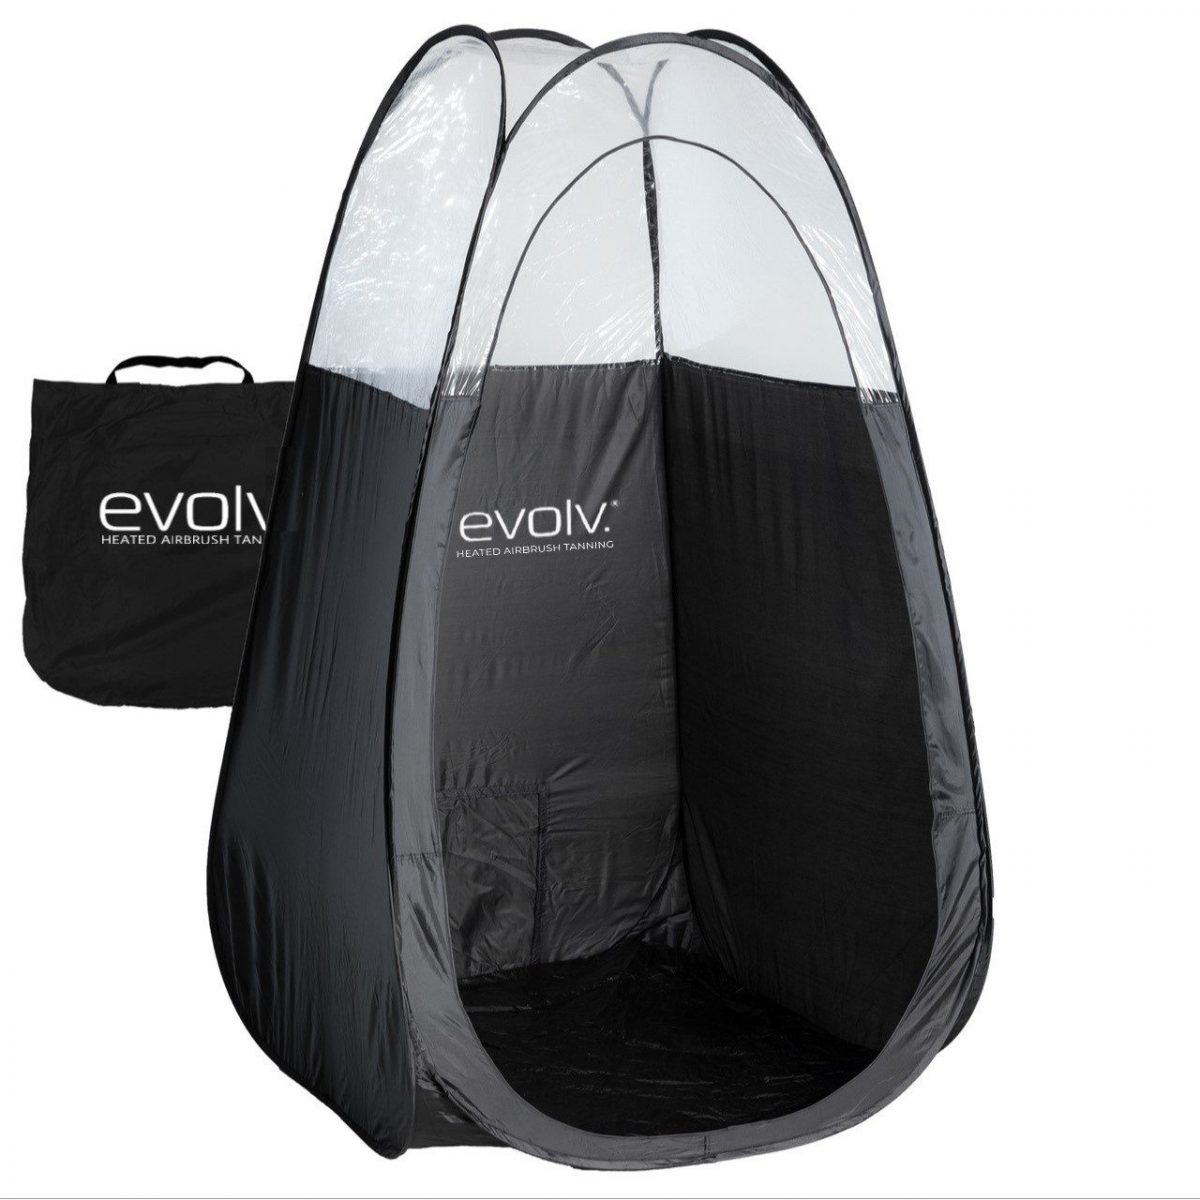 Evolv Logo Jumbo Pop-Up Tent with Carrying Bag